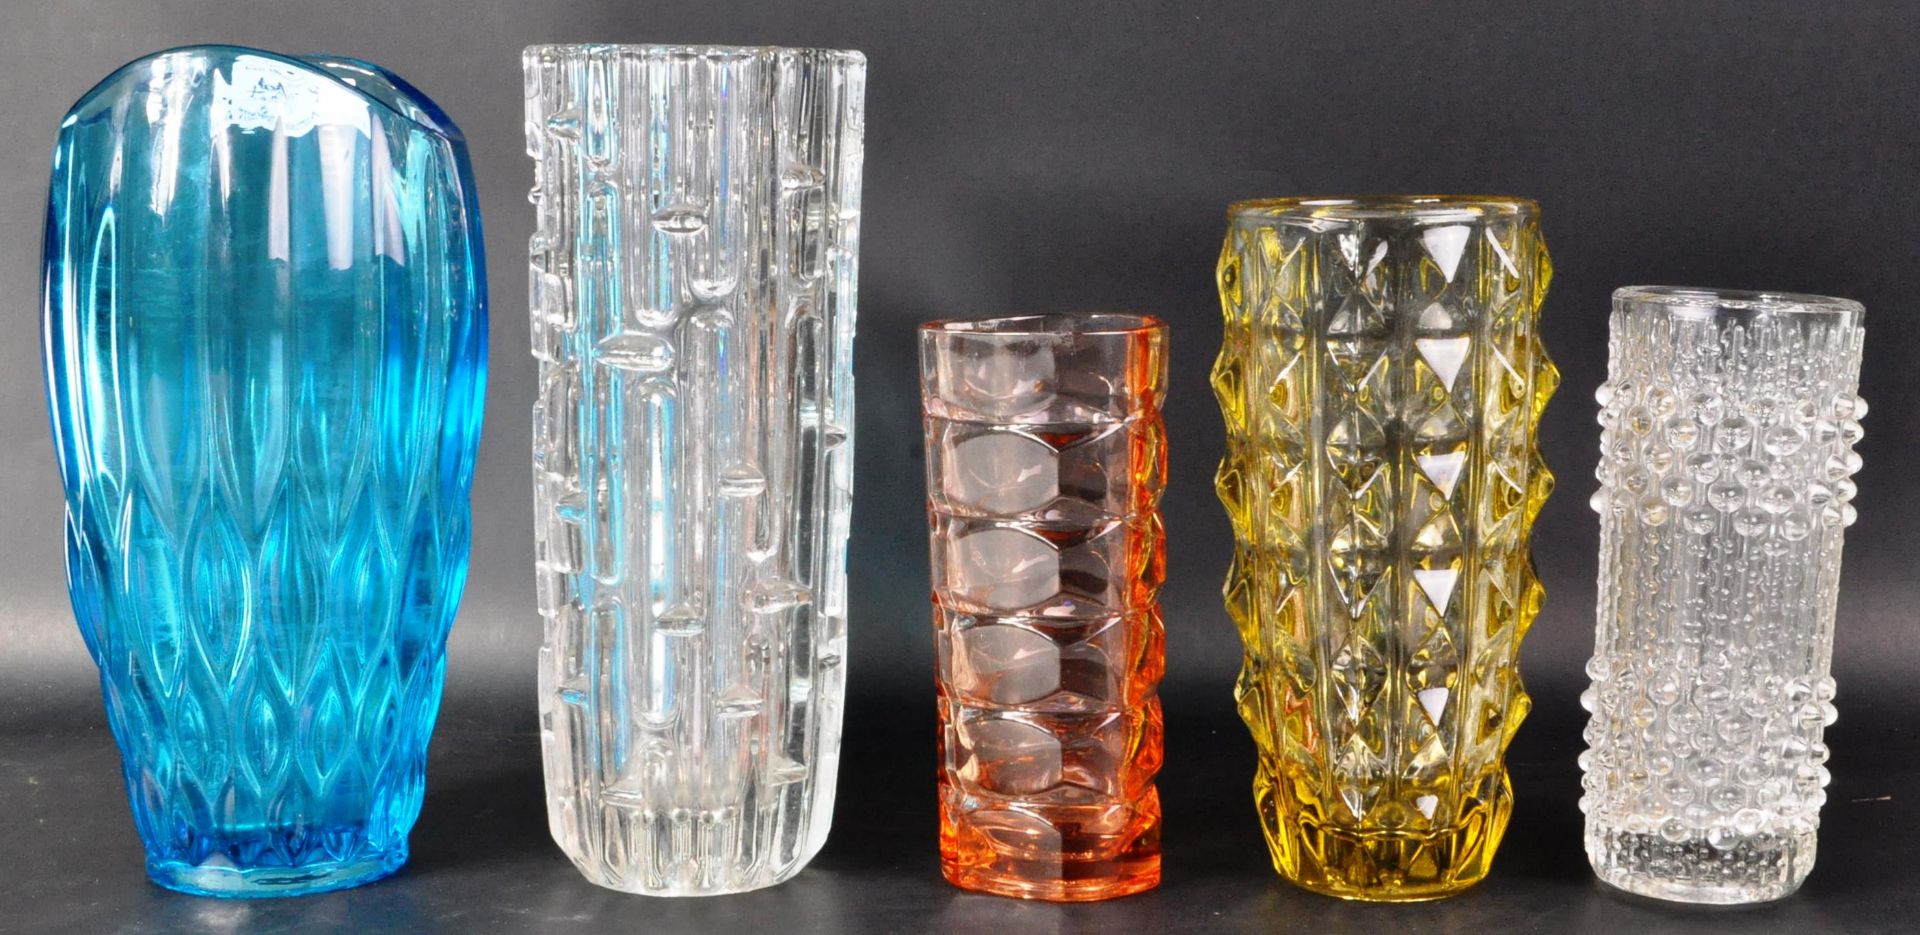 MIXED COLLECTION OF FIVE RETRO DESIGNER GLASS VASES